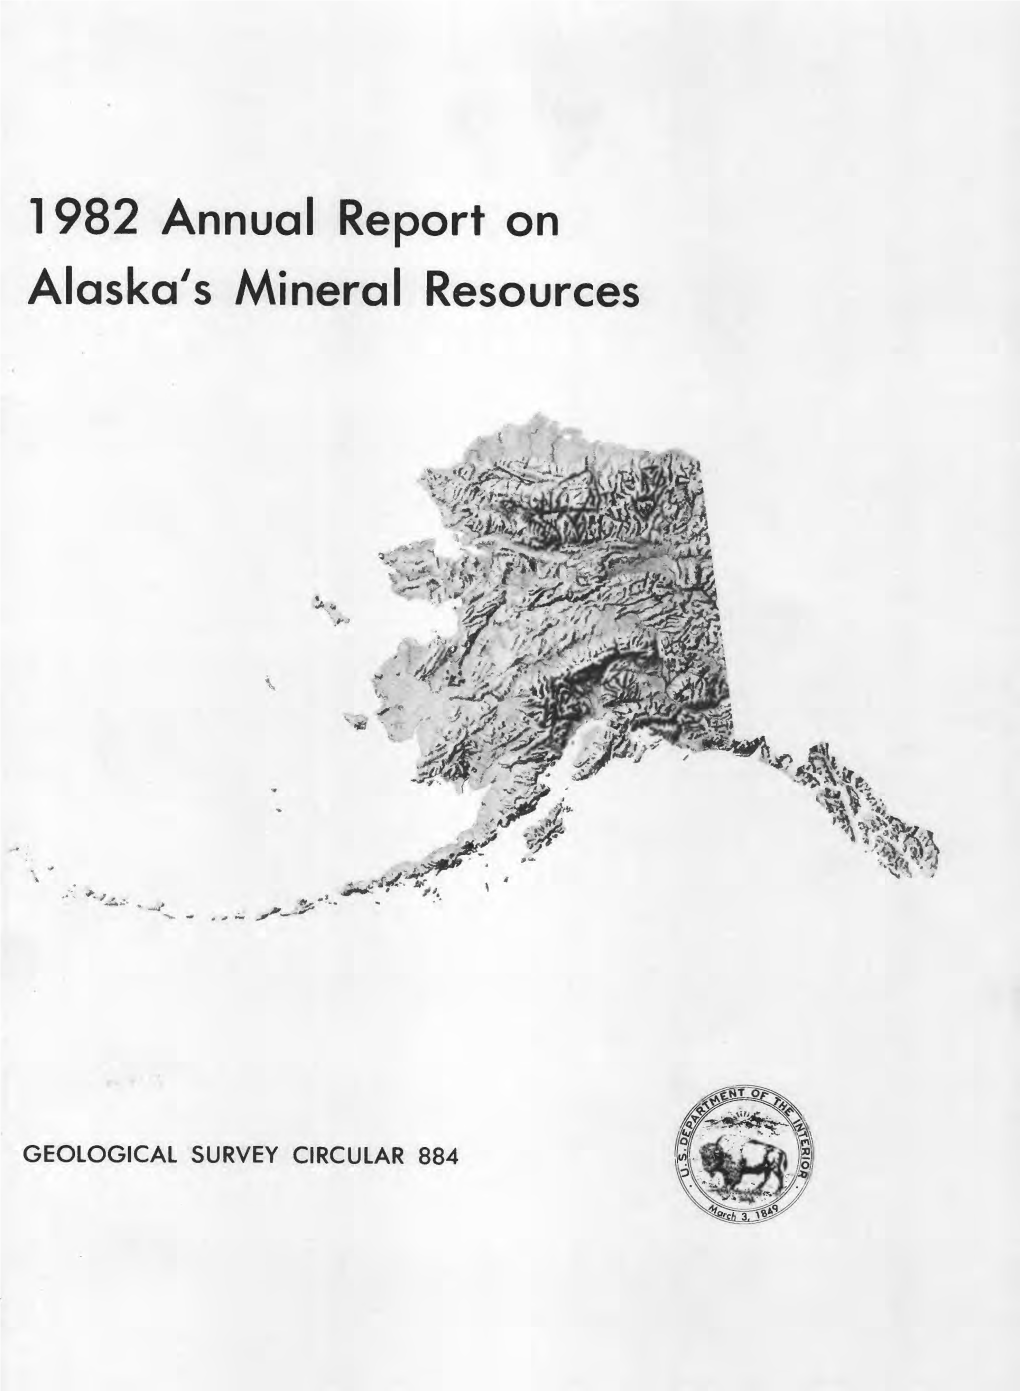 1982 Annual Report on Alaska's Mineral Resources